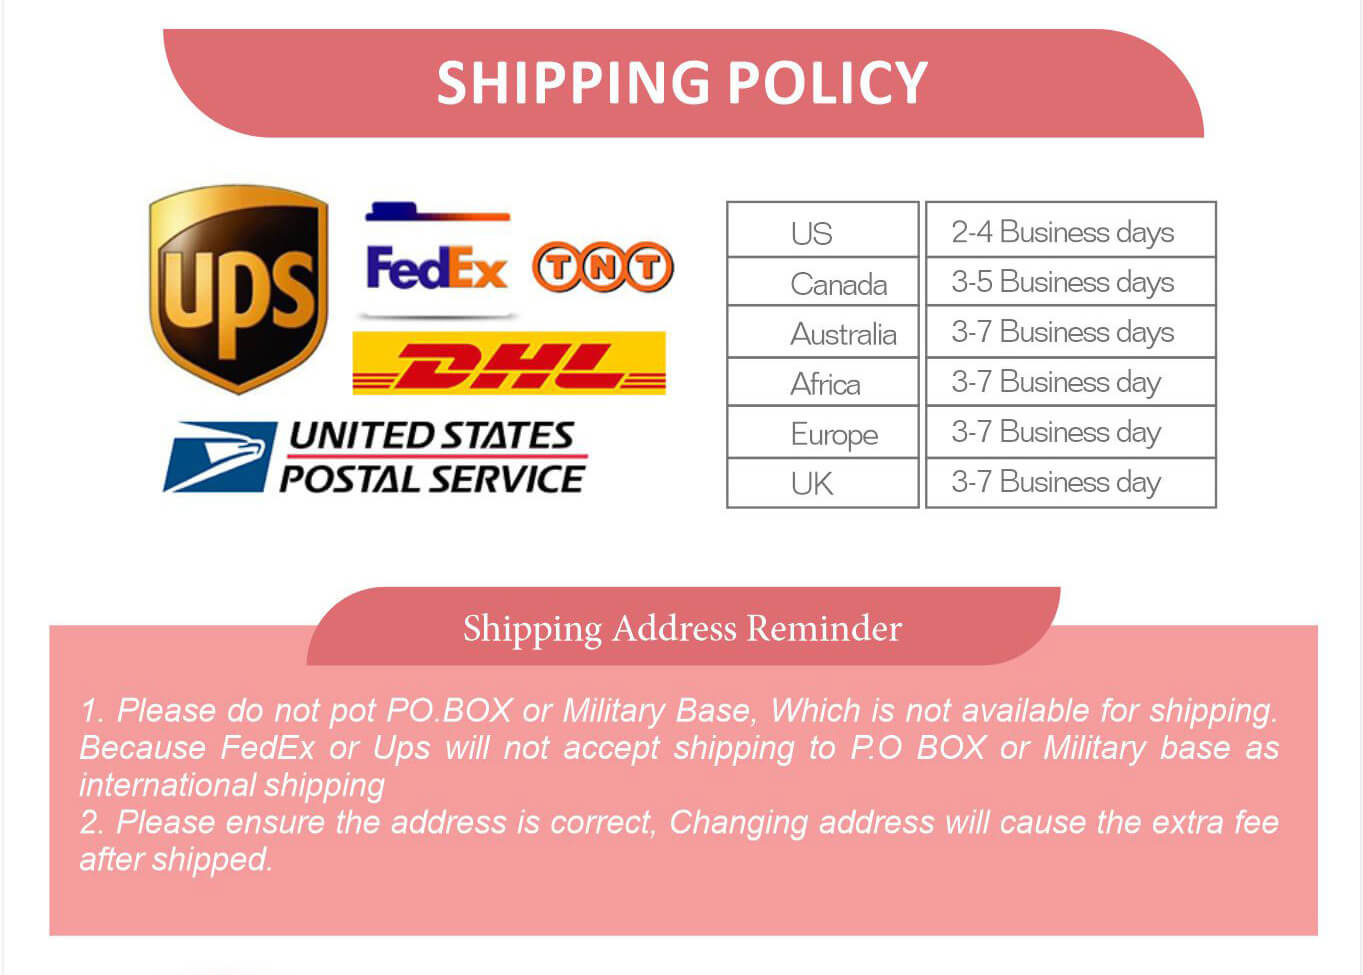 shipping policy